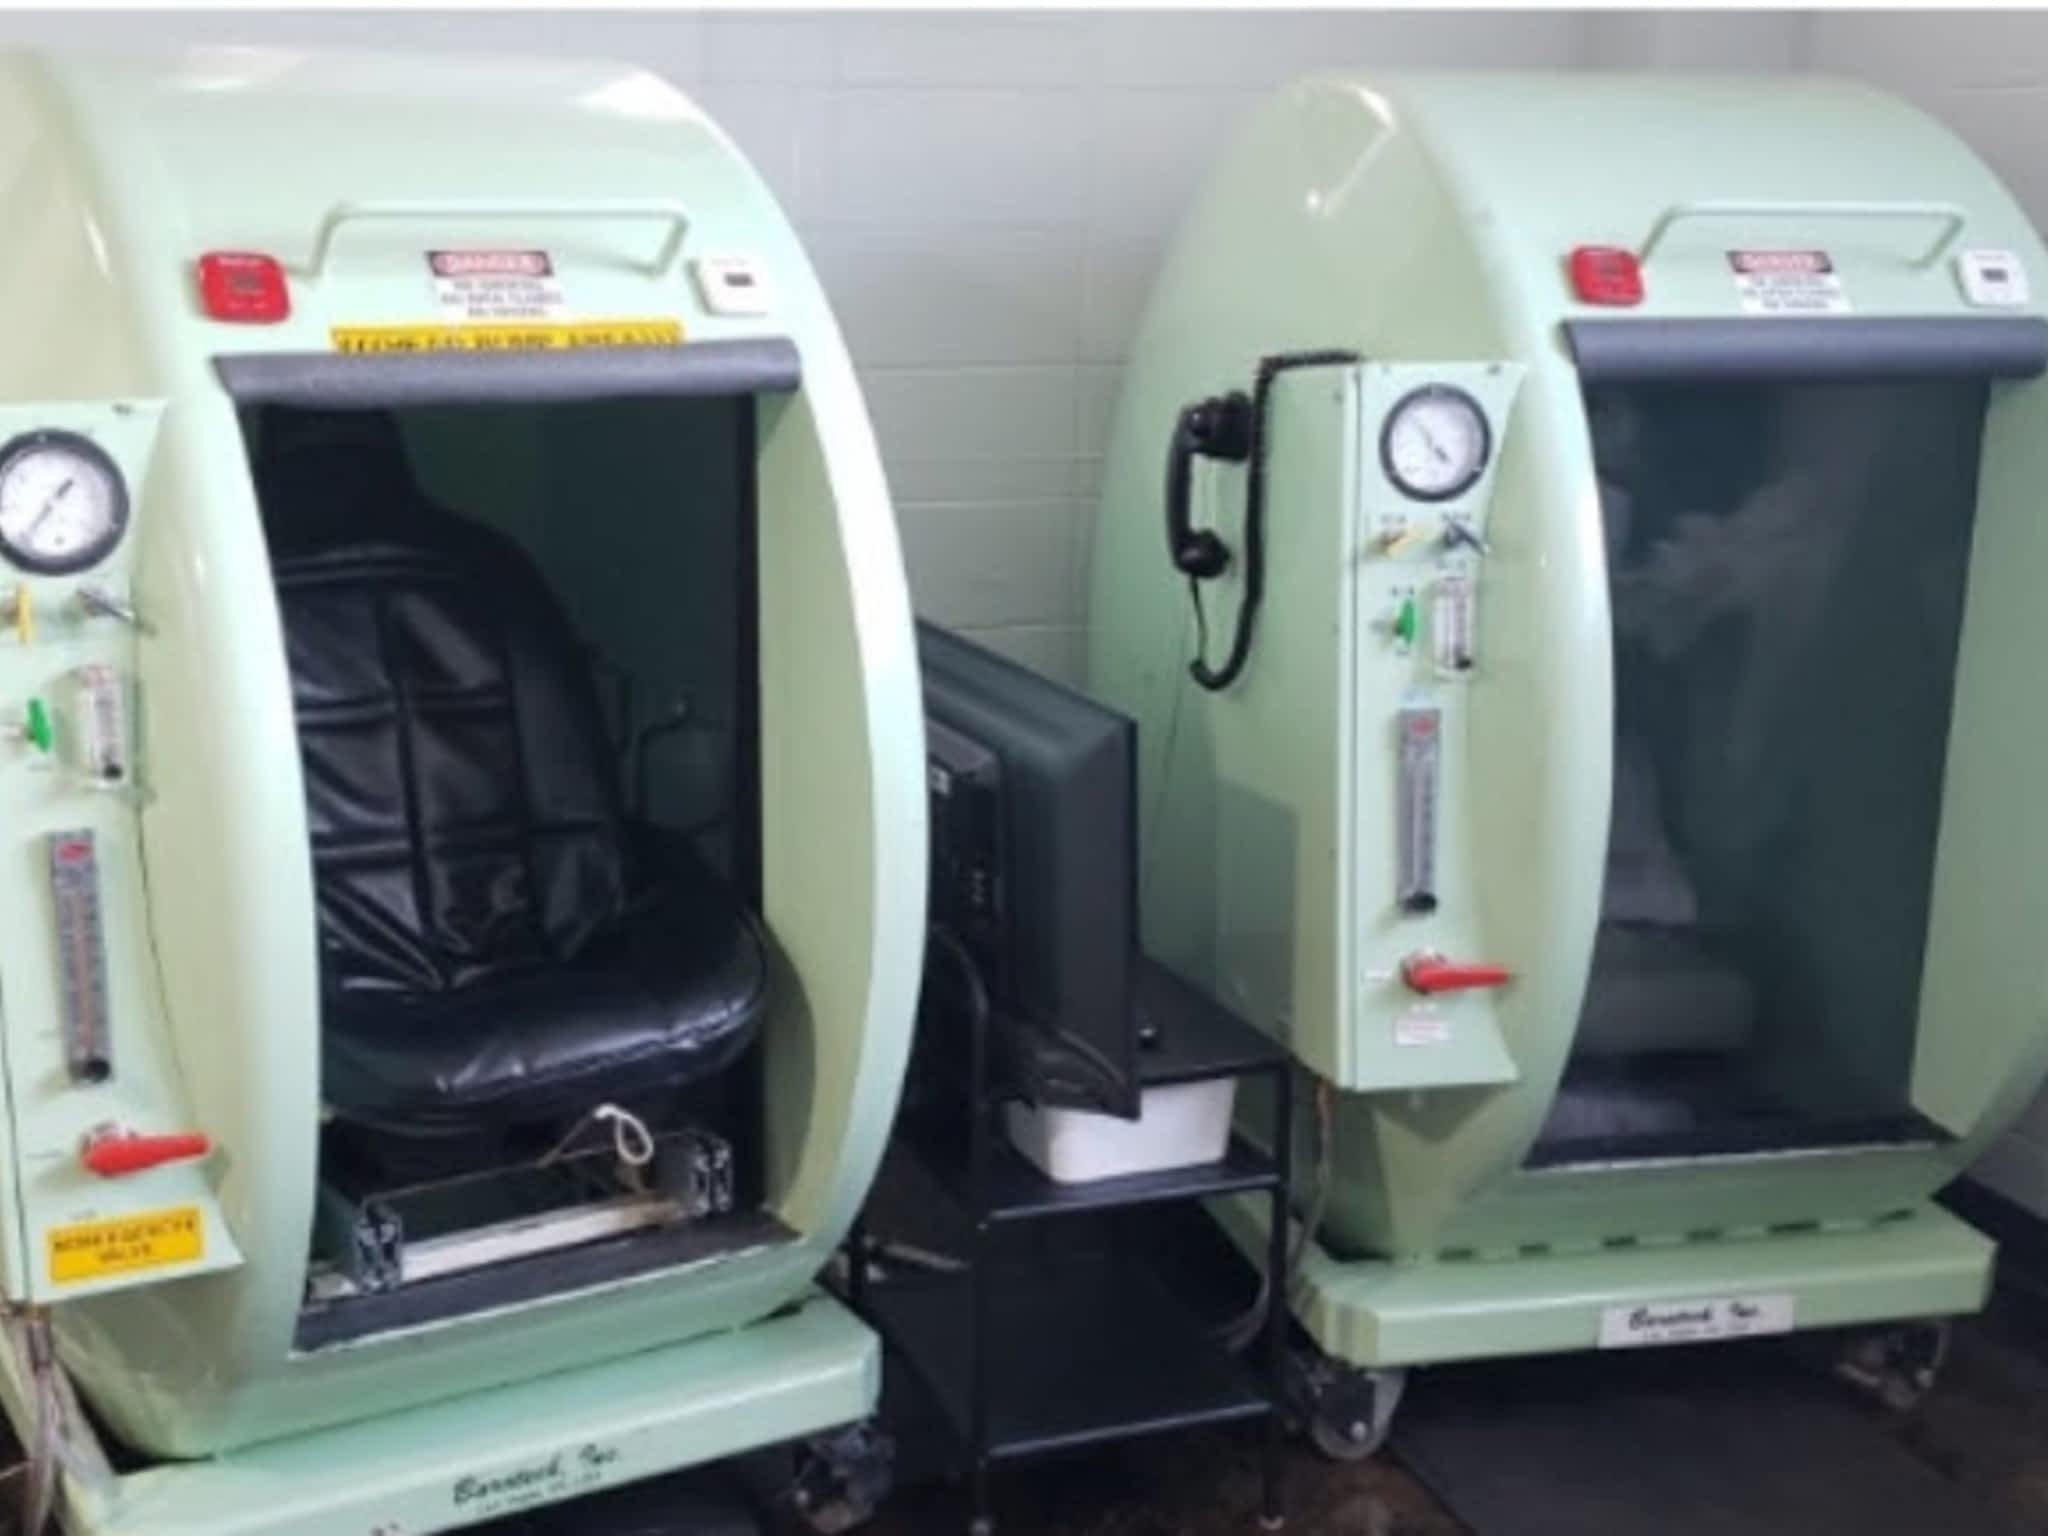 photo CANADIAN HYPERBARIC Oxygen Therapy, CANCER and LYME Therapies Apothec Naturals and Wellness